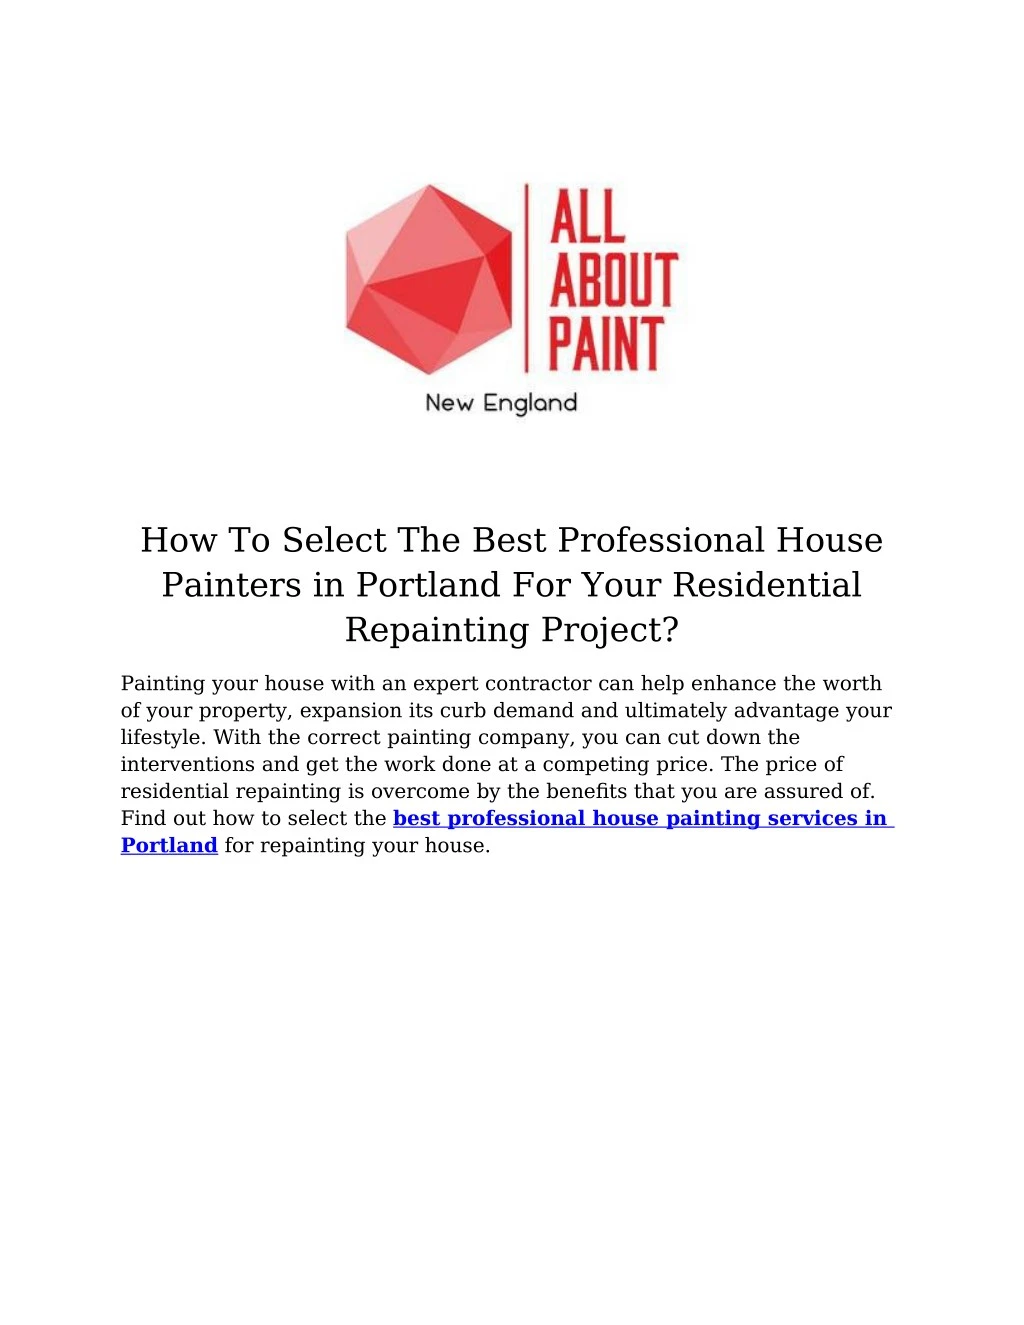 how to select the best professional house